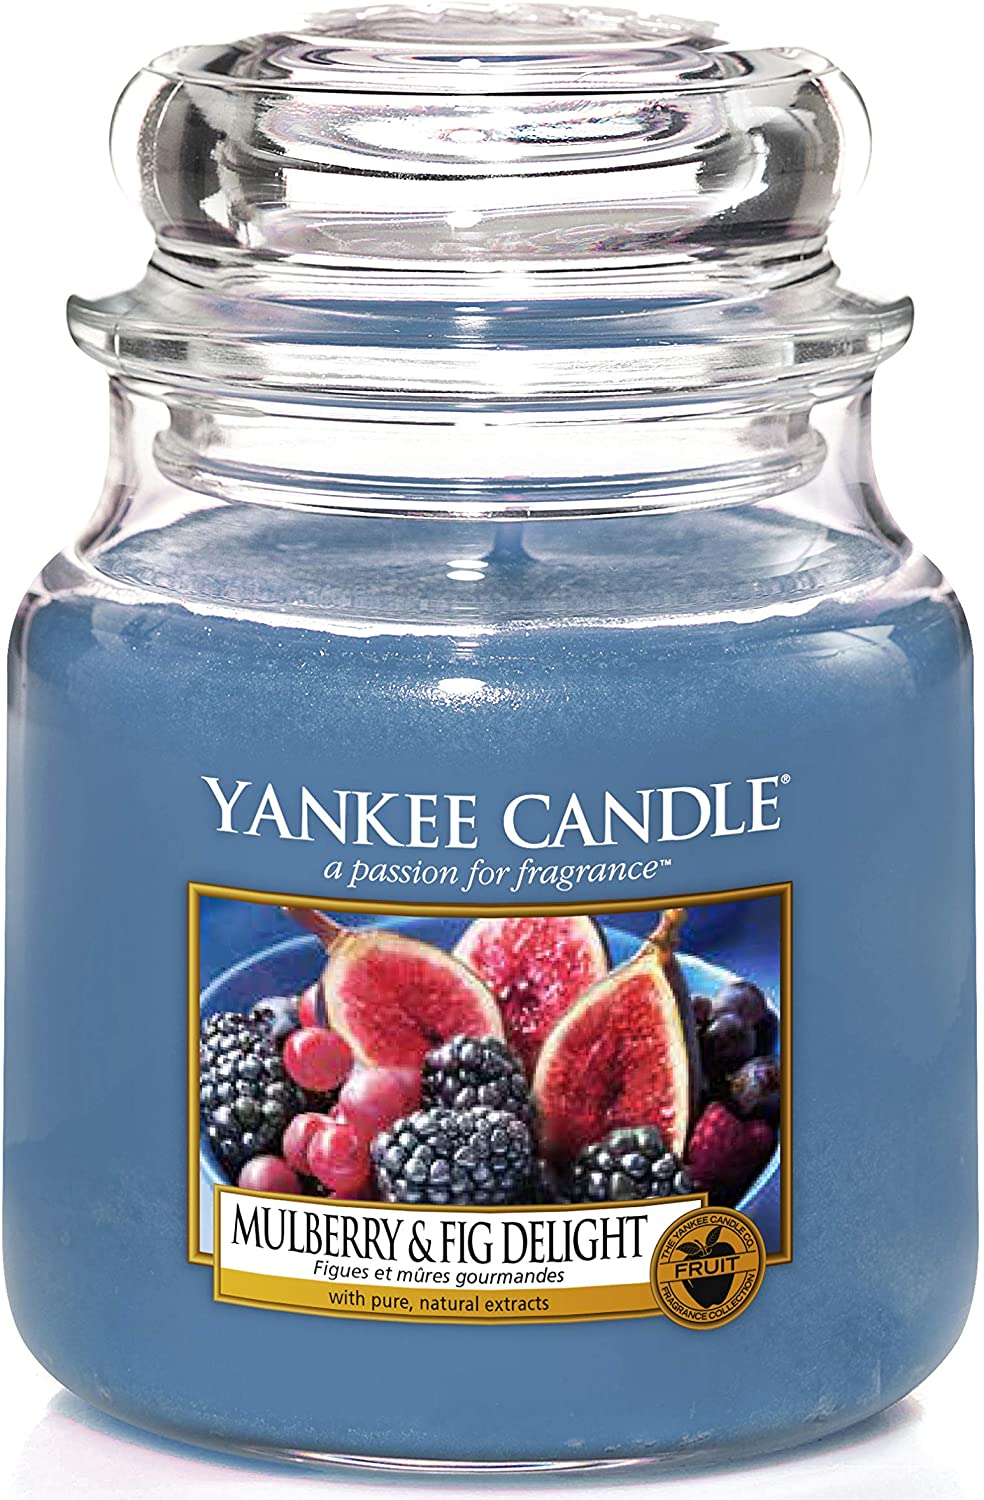 Yankee Candle Glass Candle, Medium, Mulberry & Fig, Blue, 9.9 x 9.9 x 13.5 